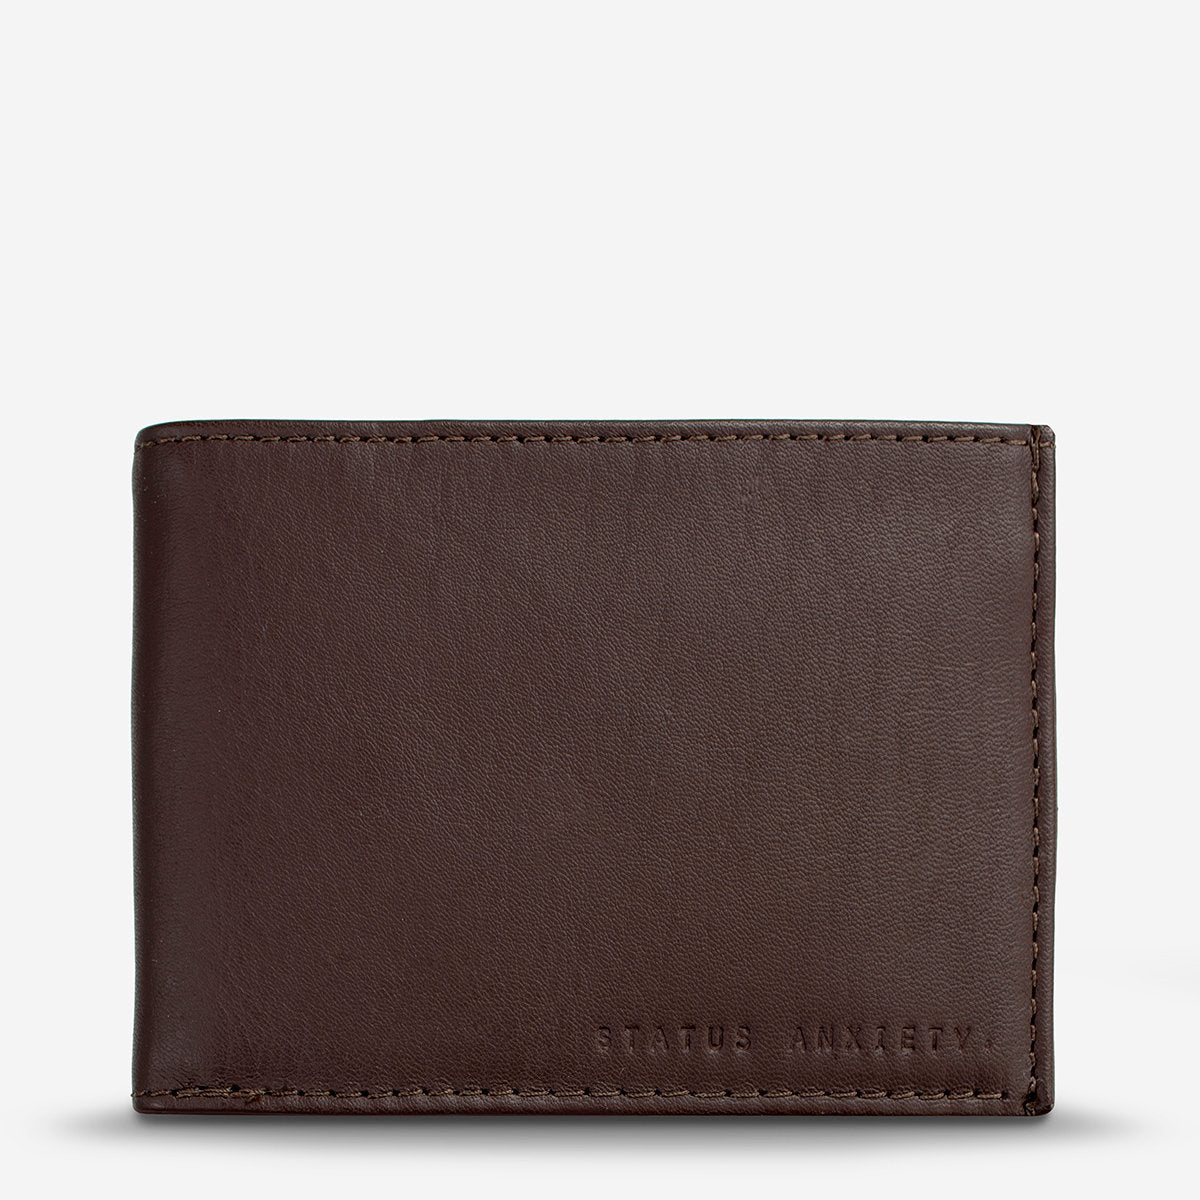 status anxiety wallet noah chocolate front